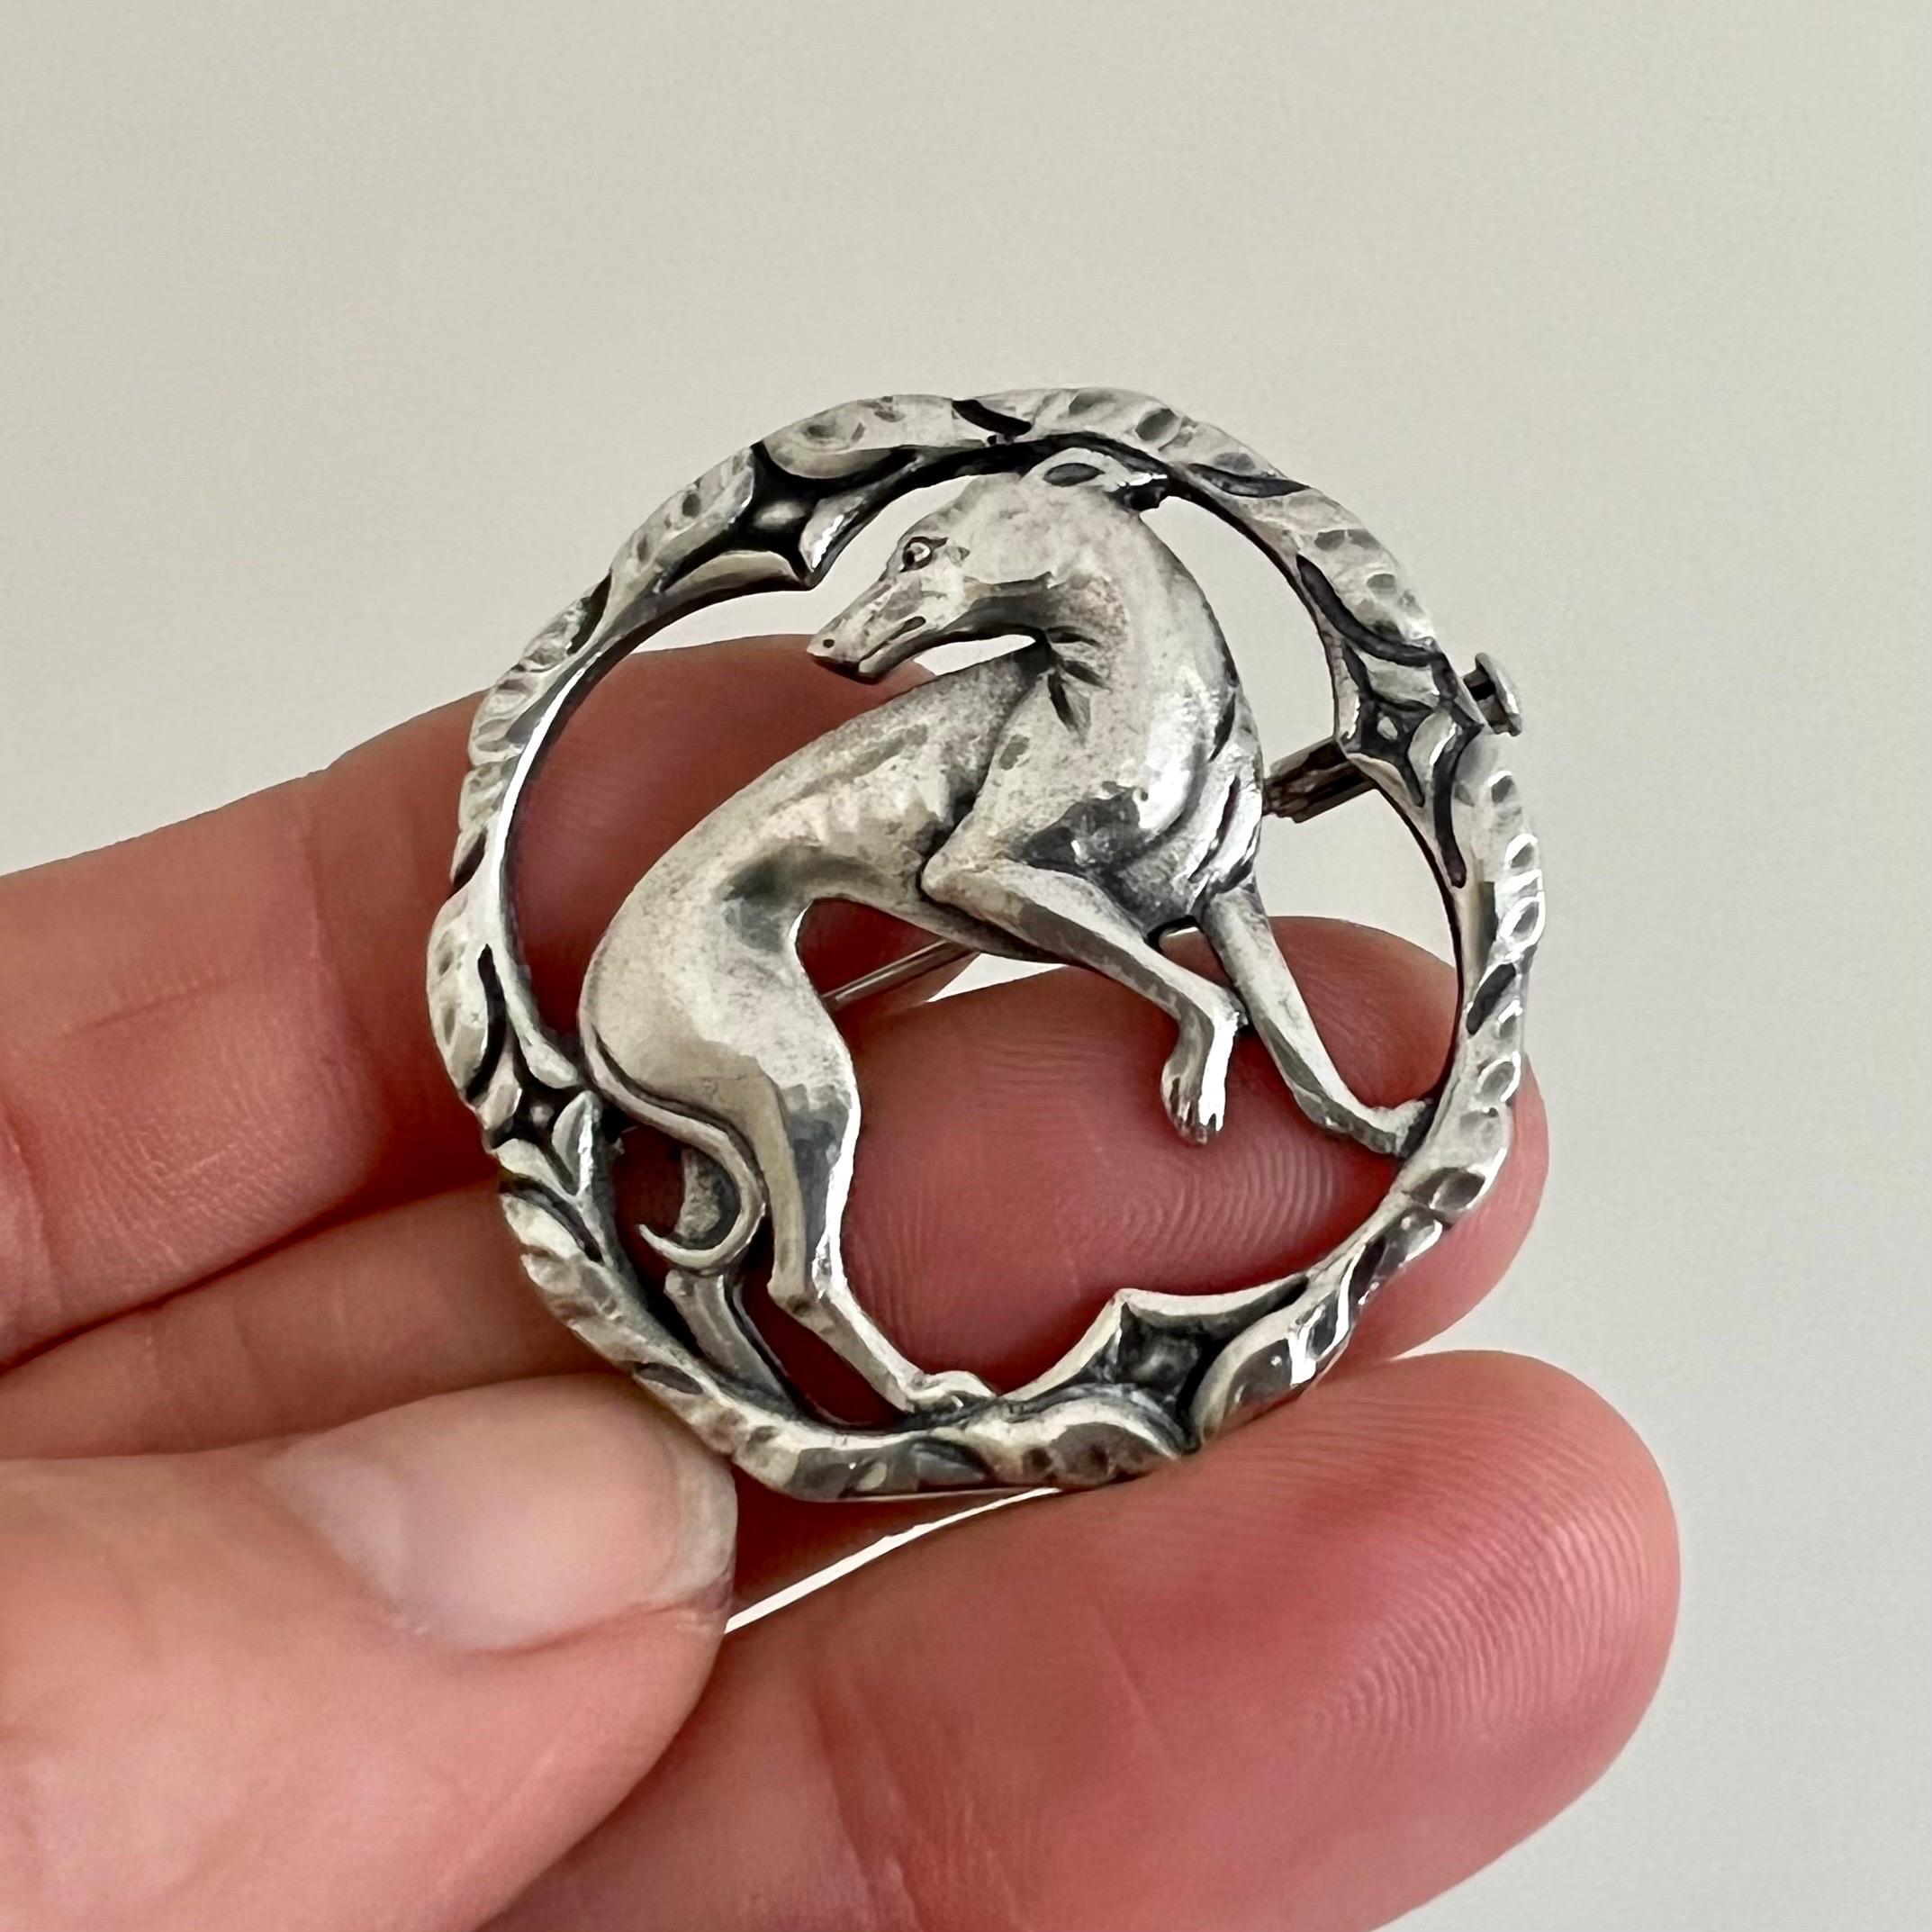 A lovely vintage silver round brooch depicting a greyhound whippet in the middle. The brooch is made of polished silver and beautifully stylized, while the line engravings of the border and the gorgeous dog have a natural patina. At the back of the